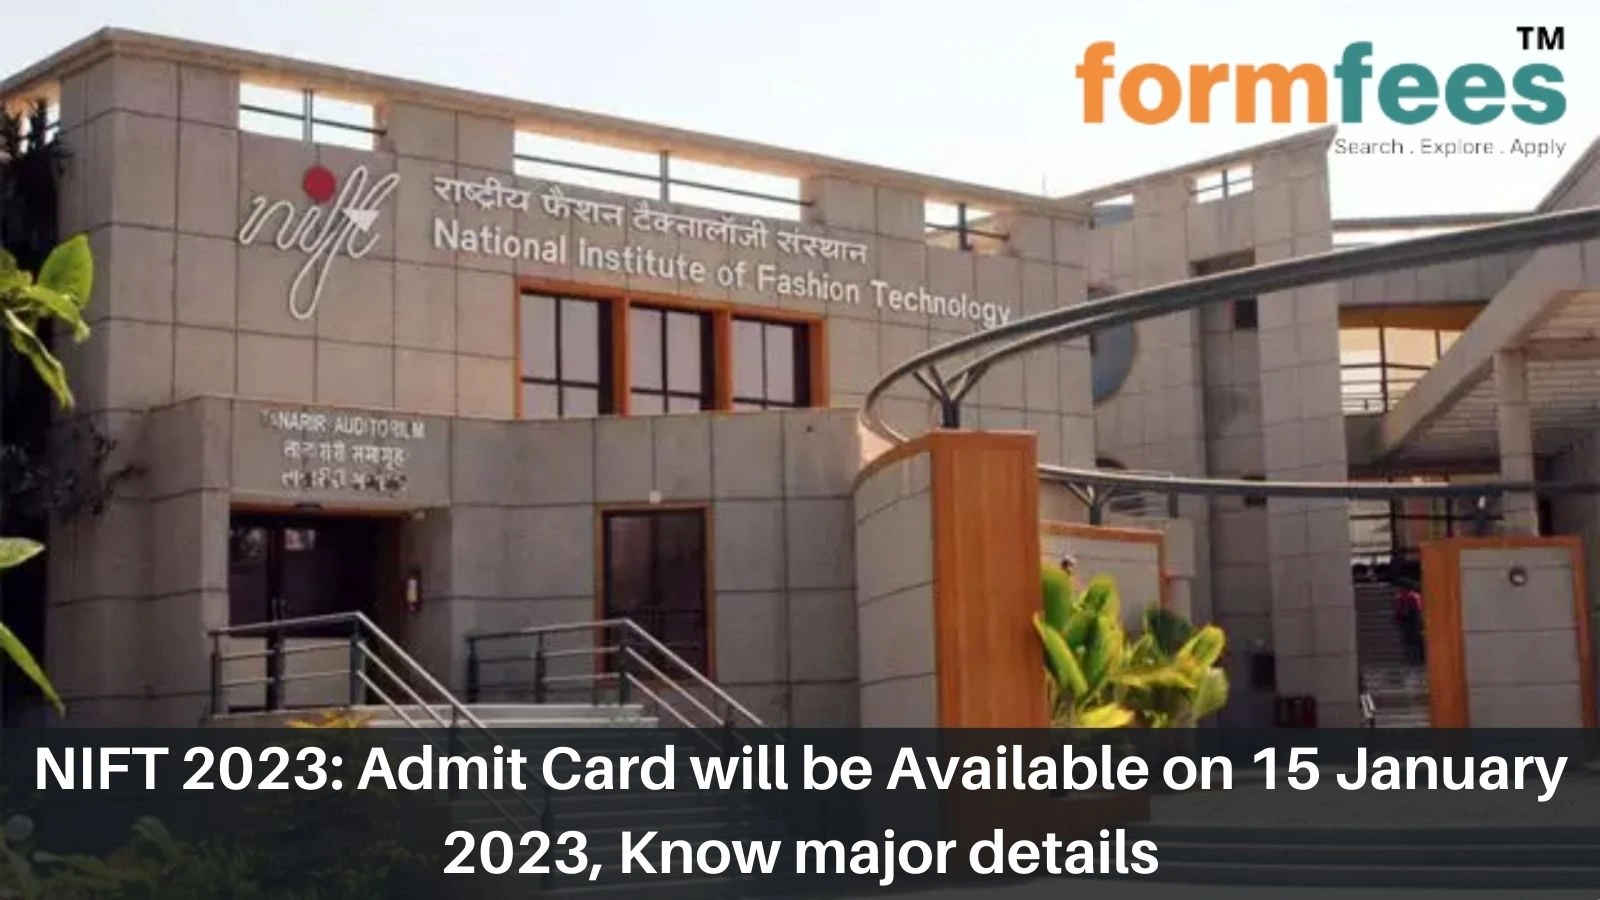 NIFT 2023: Admit Card will be Available on 15 January 2023, Know major details